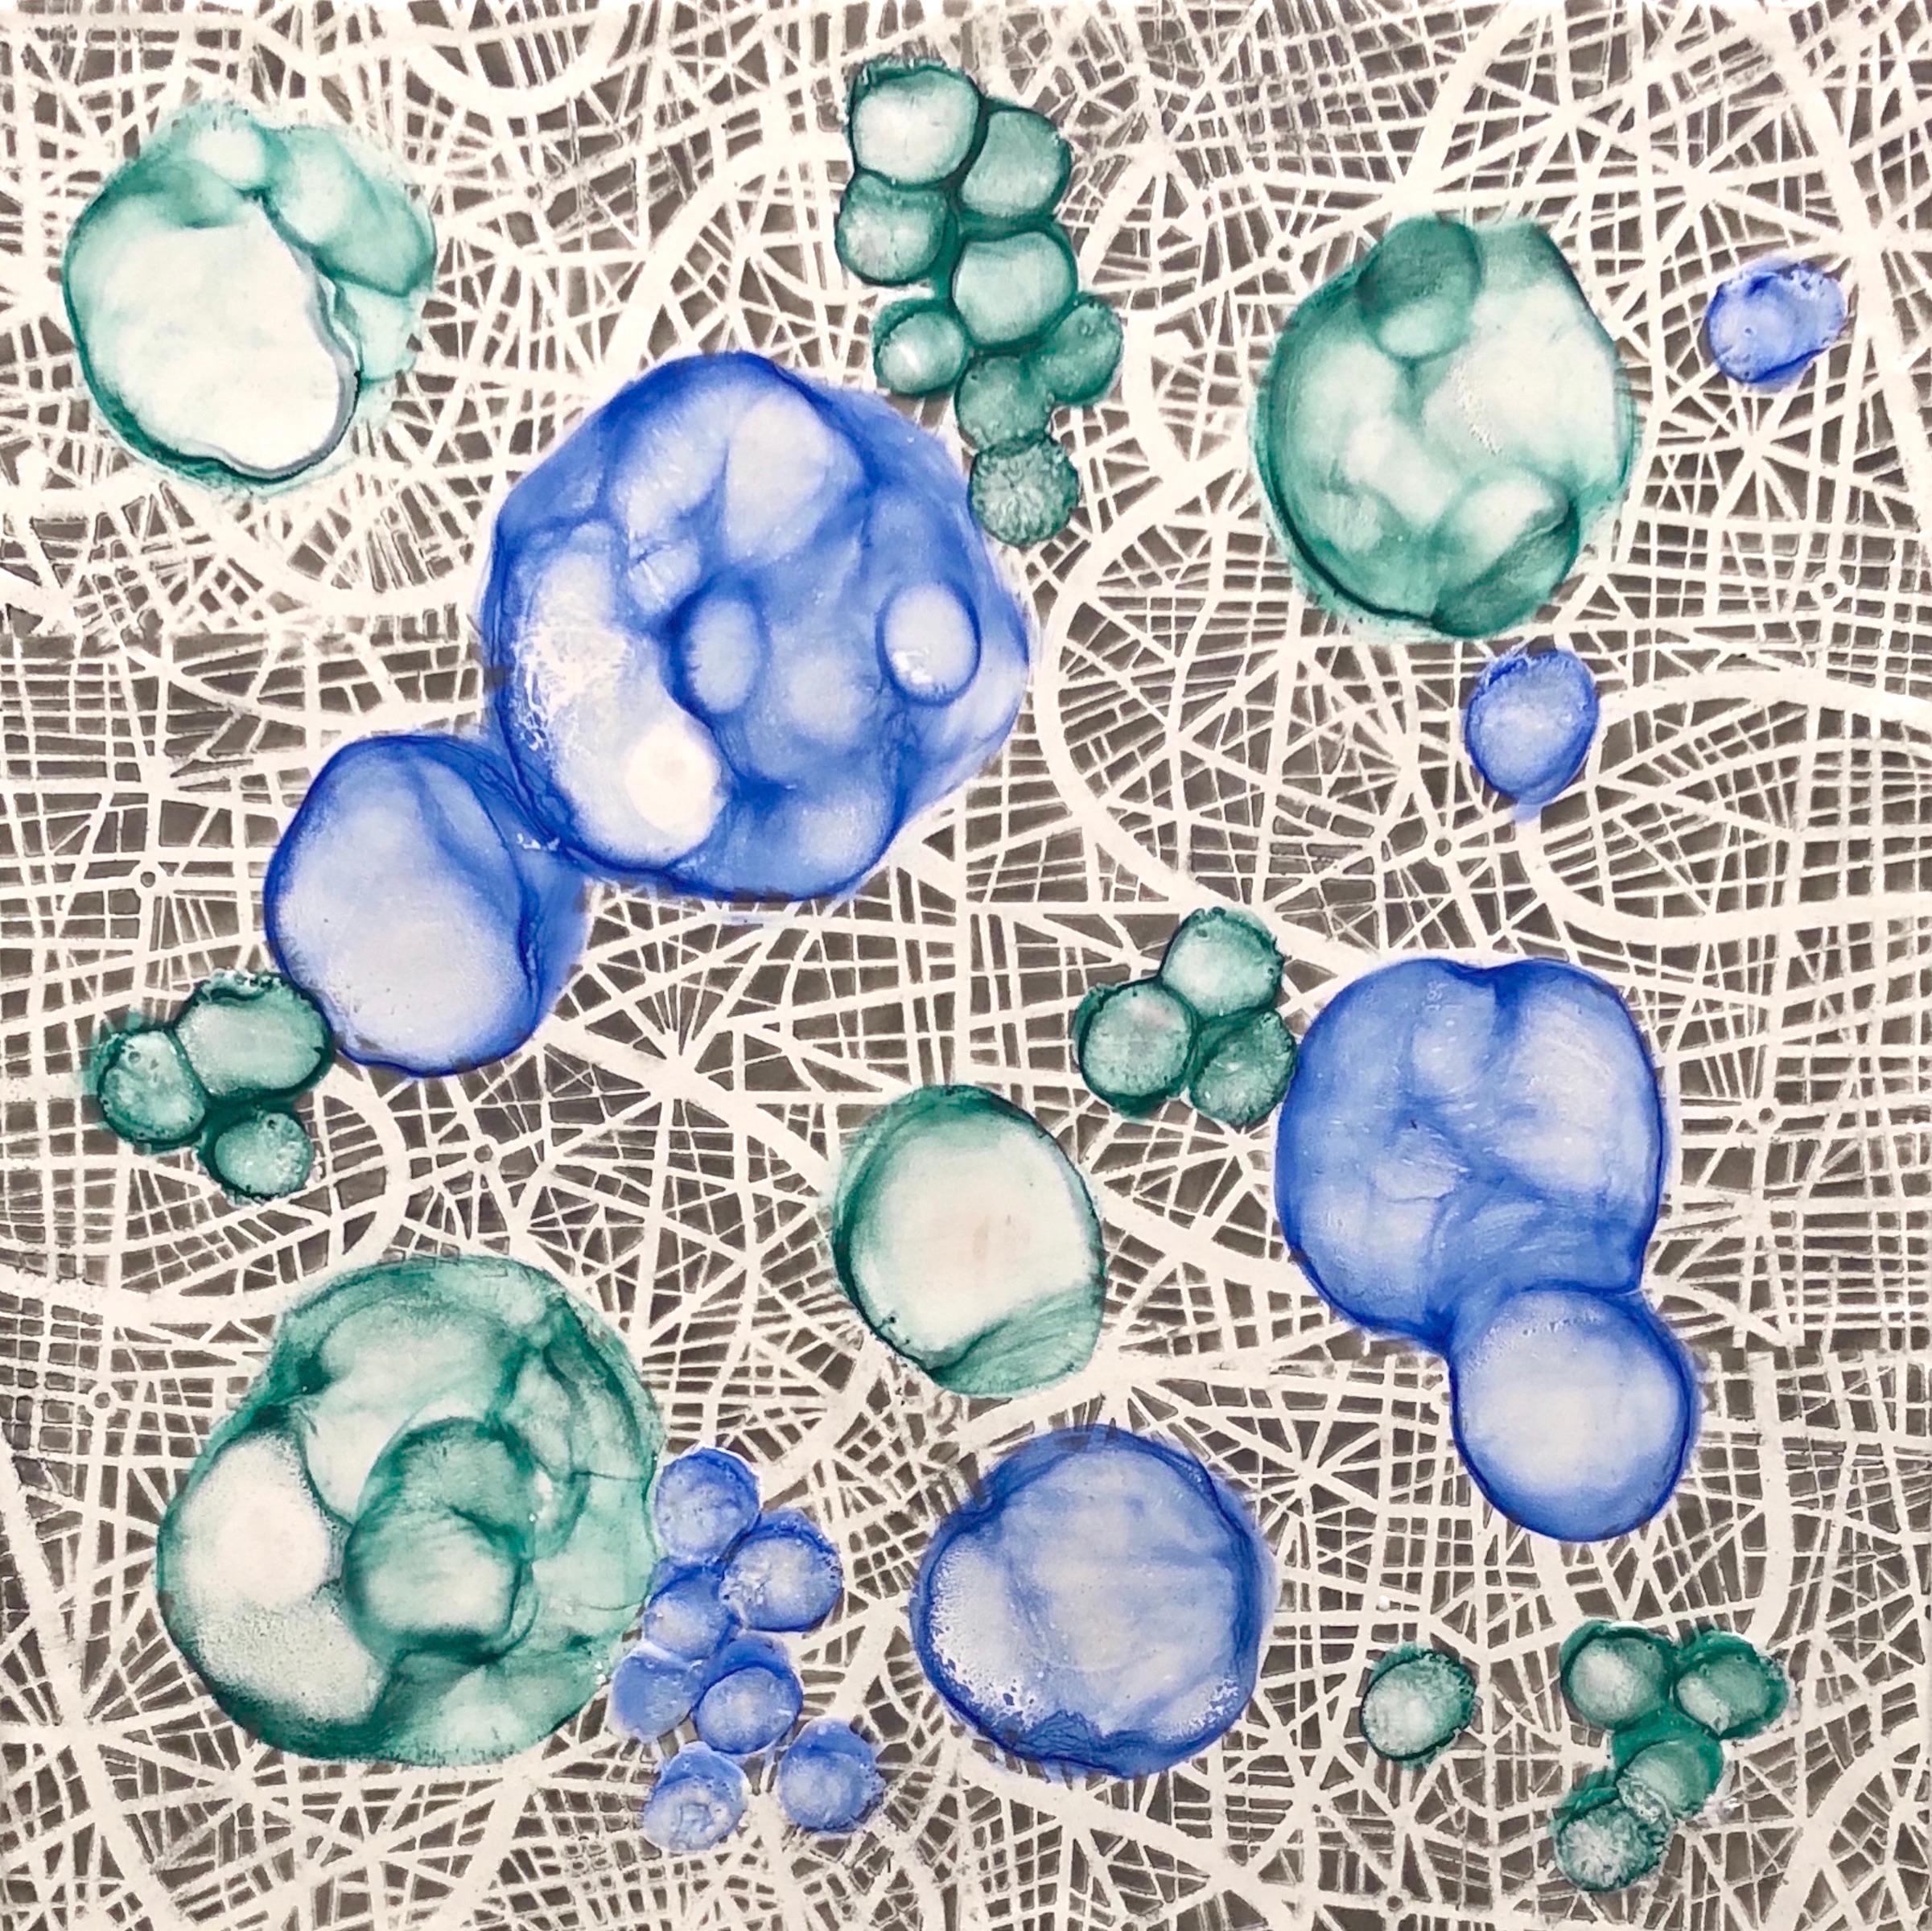 "Bio Networks 2", encaustic, pastel, abstract, microscopic, blue, green grey